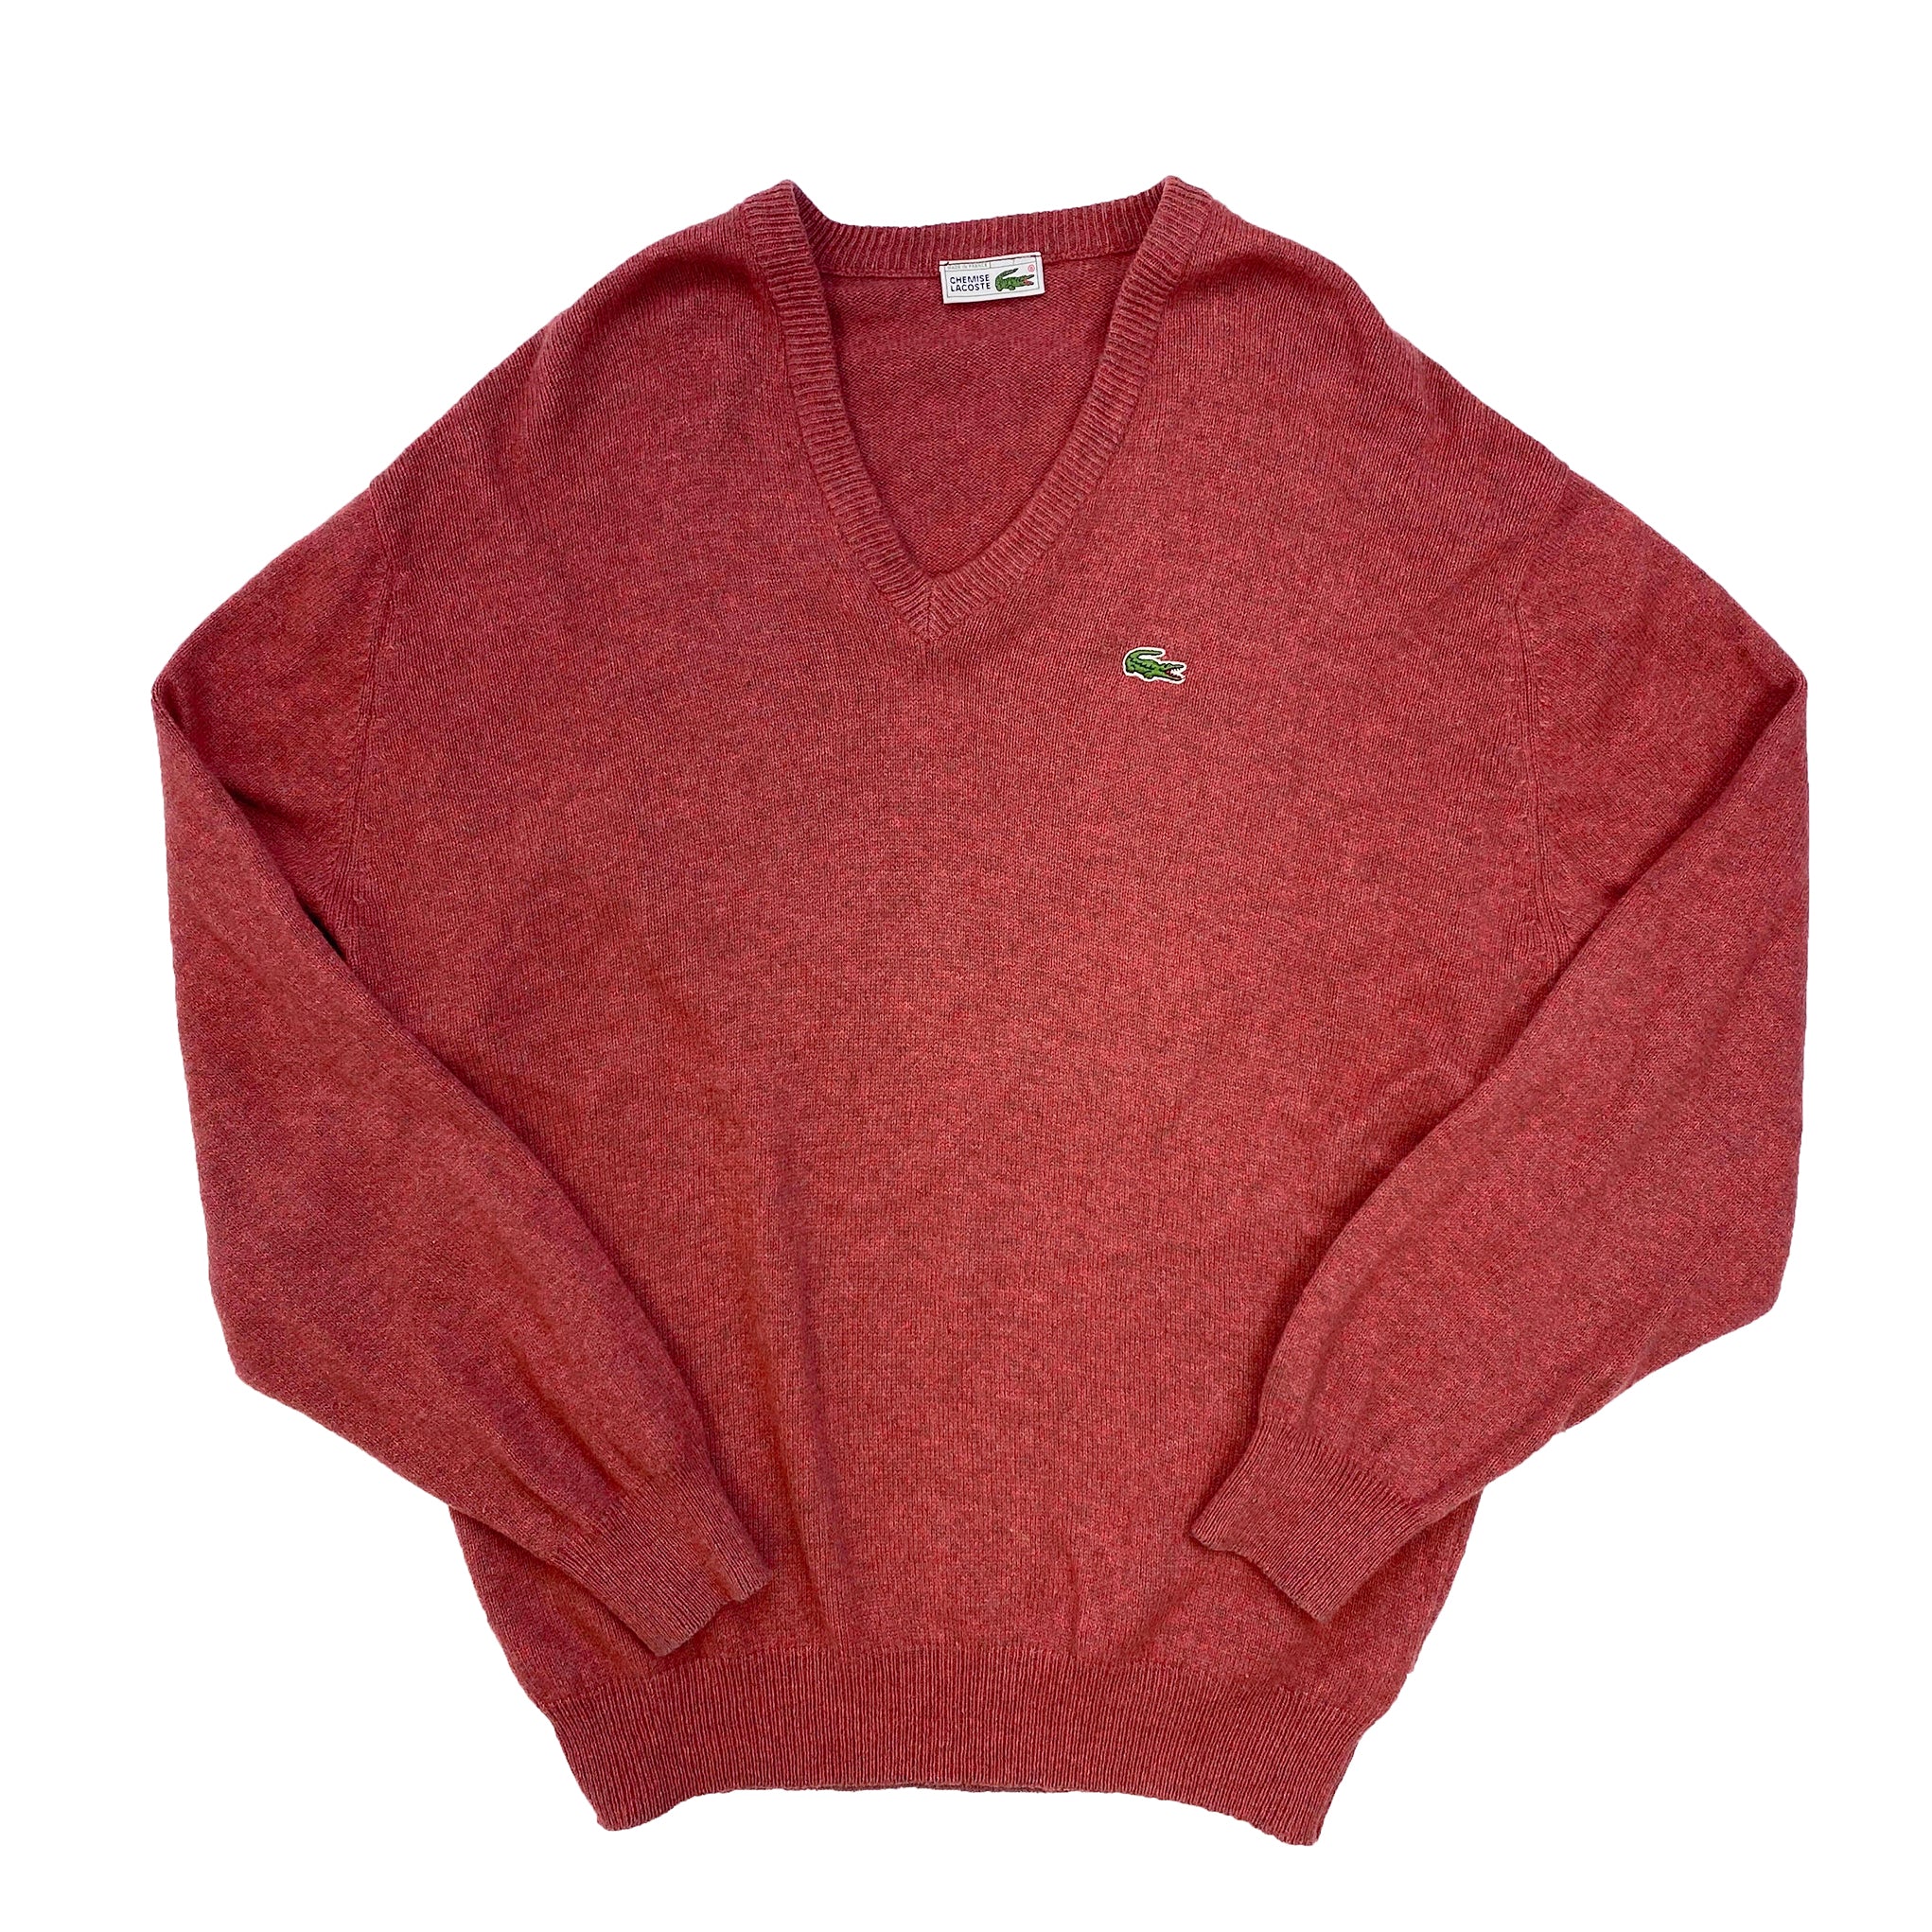 Chemise Lacoste Coral Red Wool Knitted Vintage Jumper